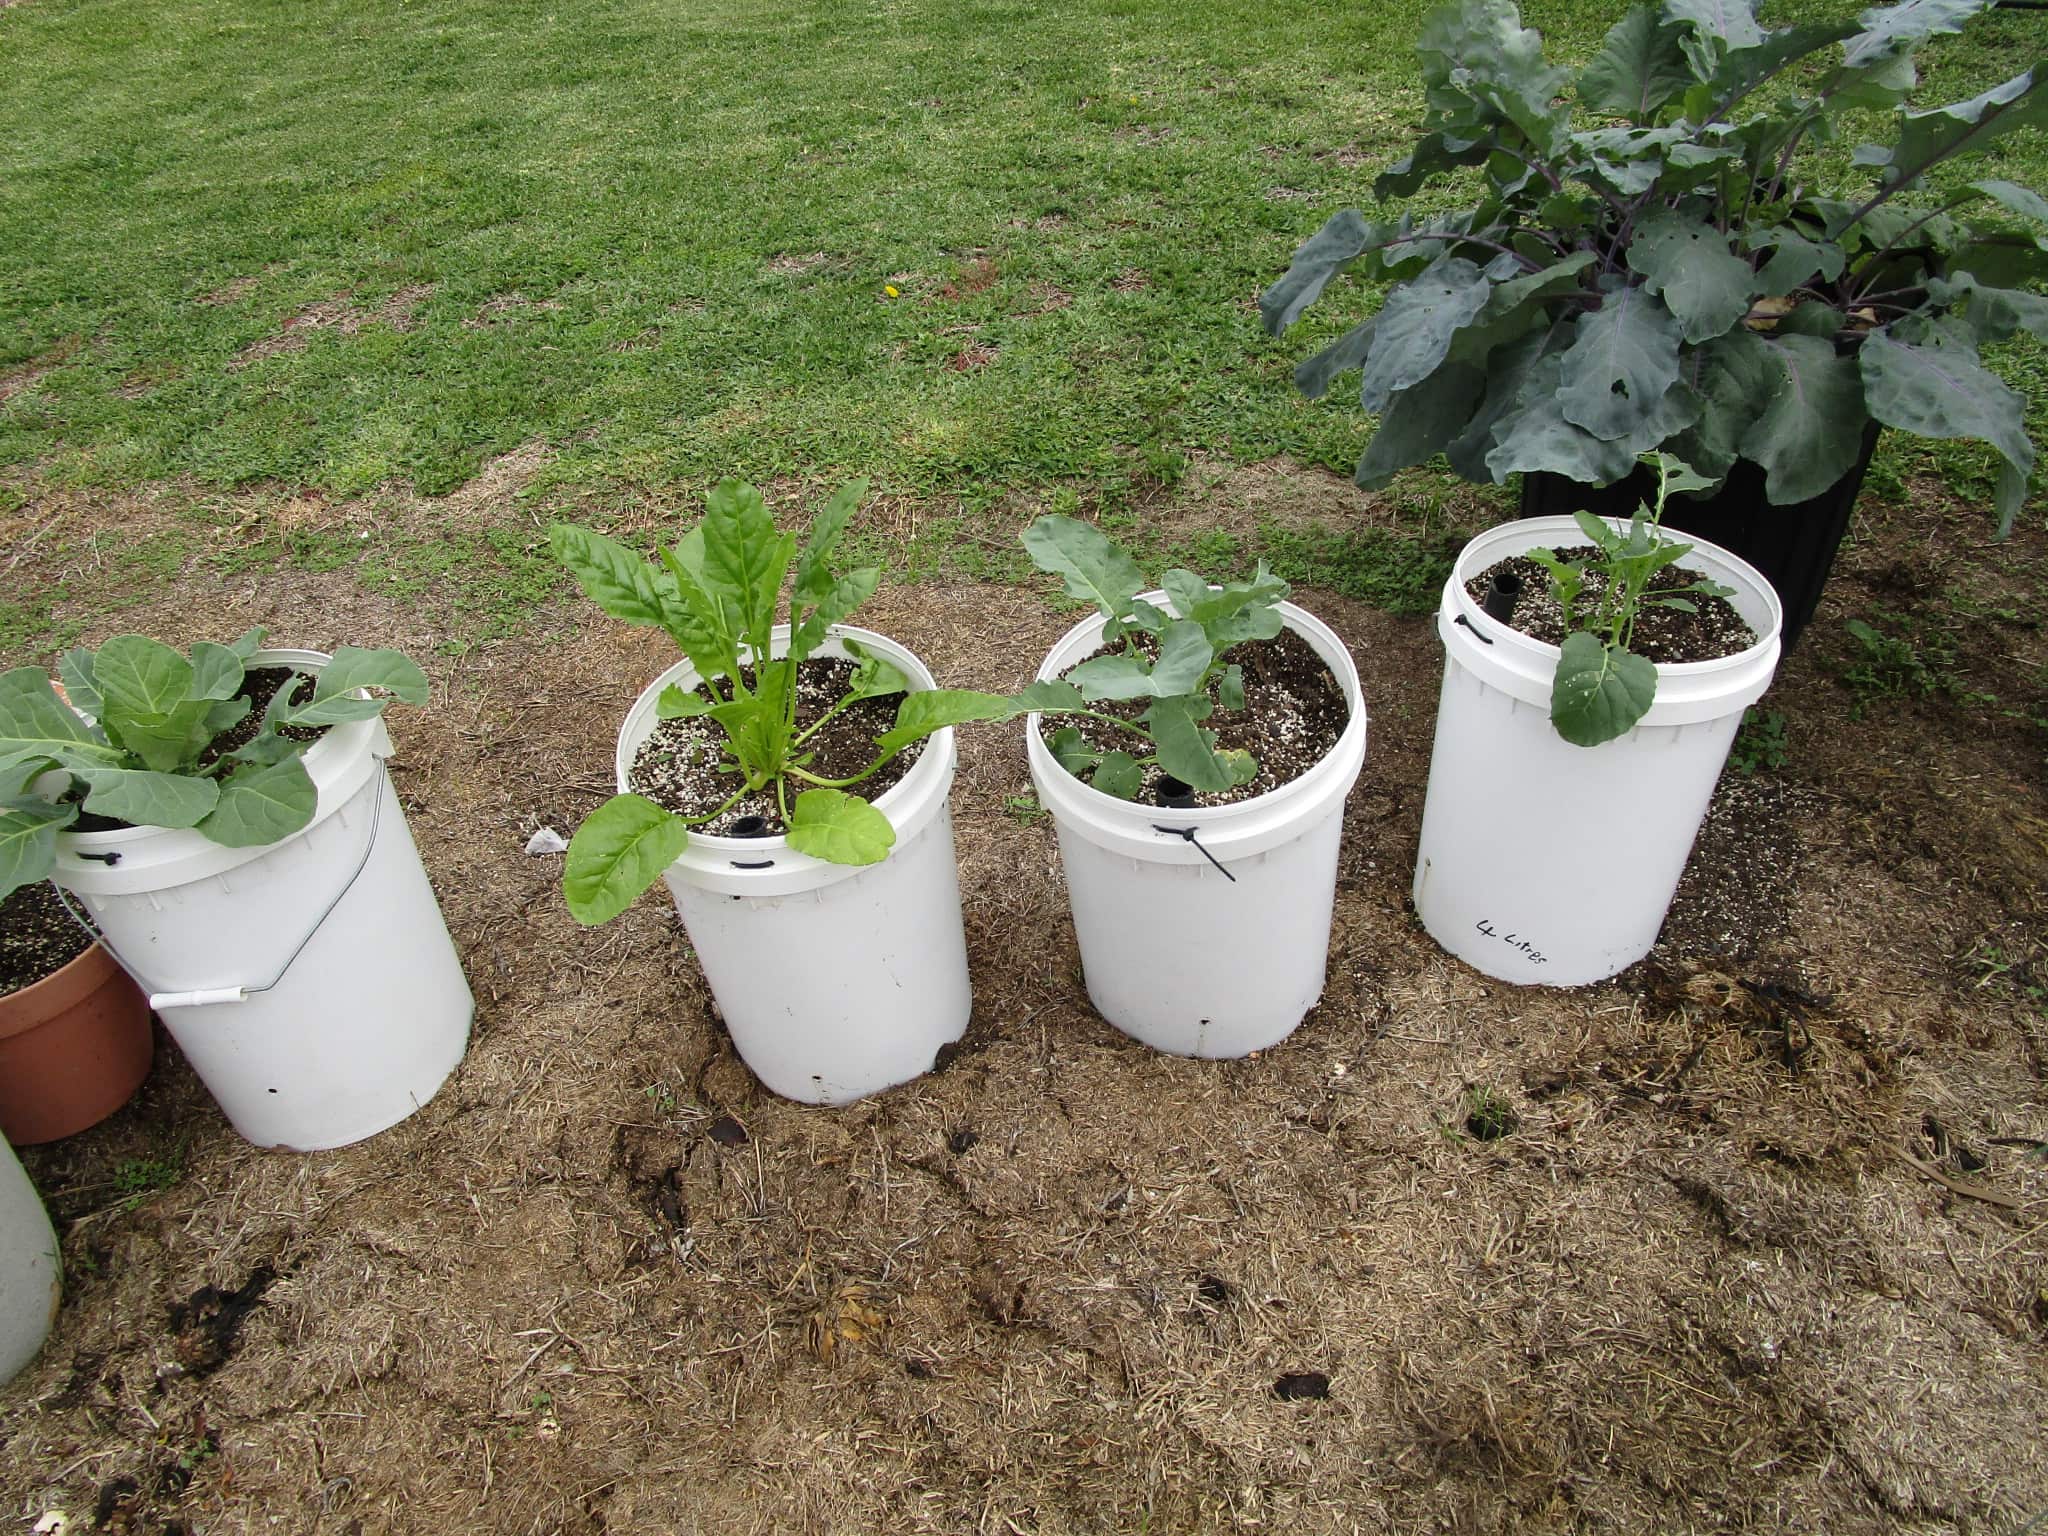 The Basics of Vegetable Gardening in Containers